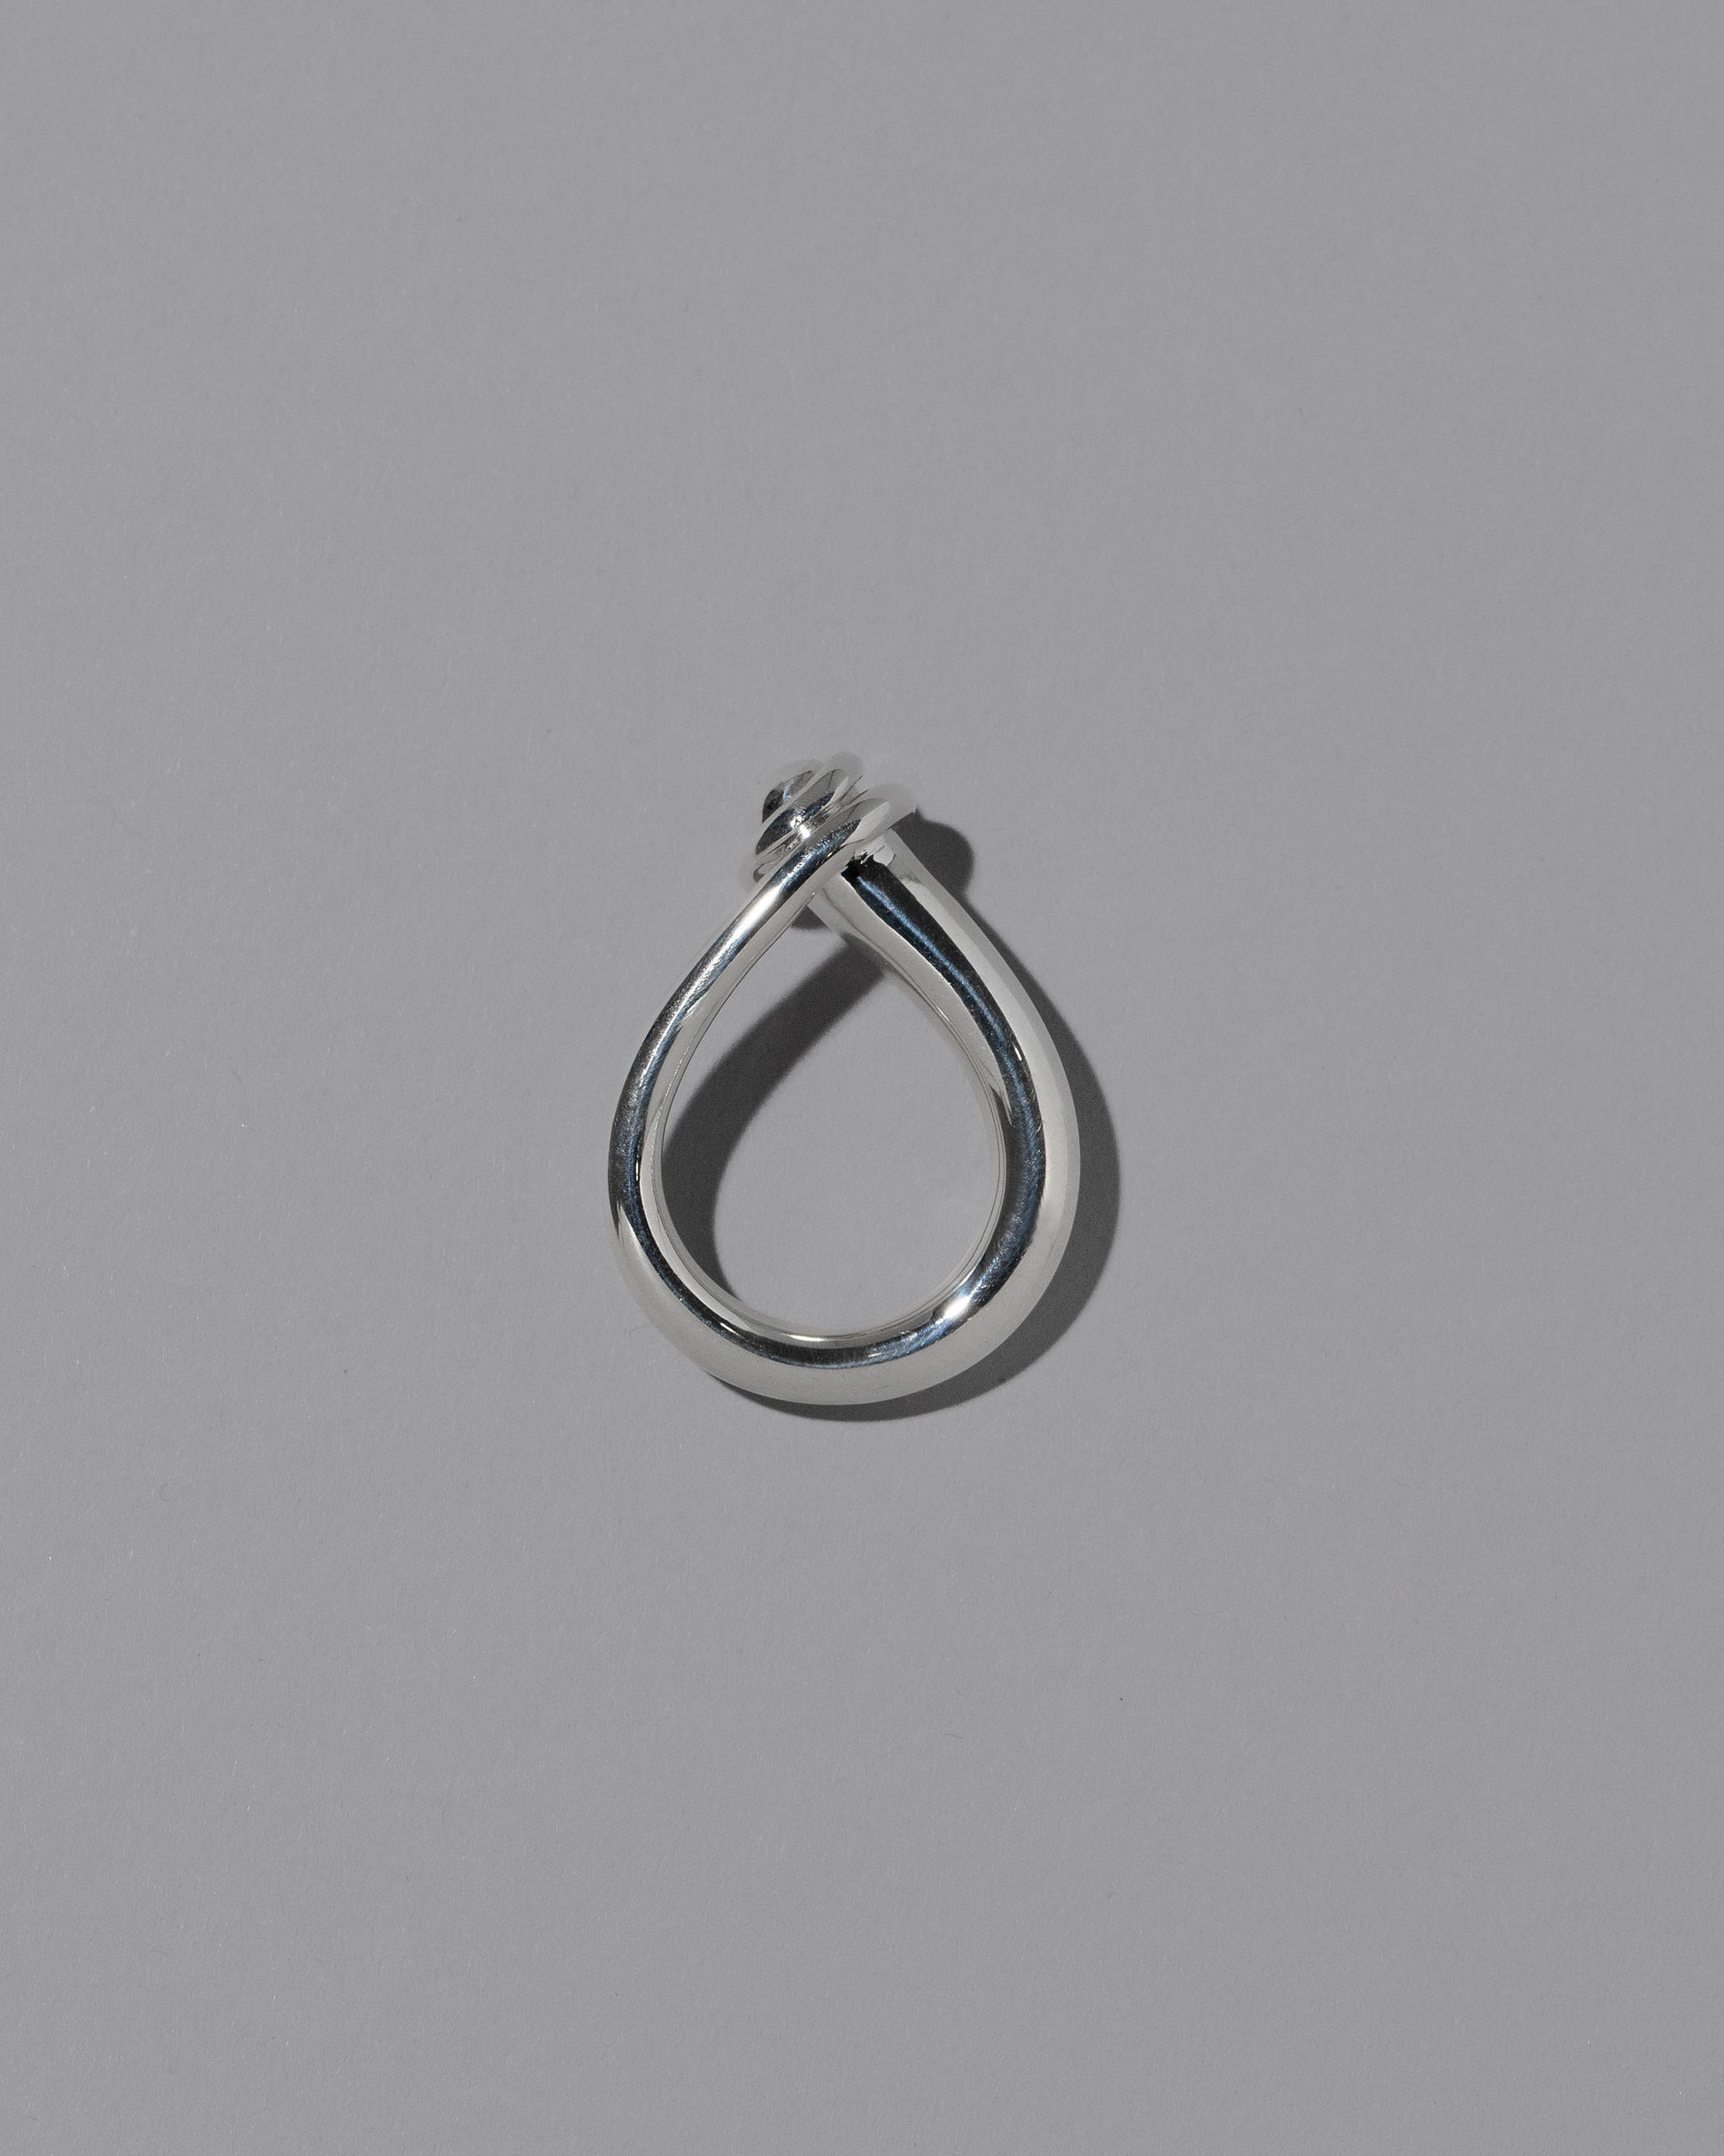 View from the side of the CRZM Sterling Silver Boulder Ring on light color background.